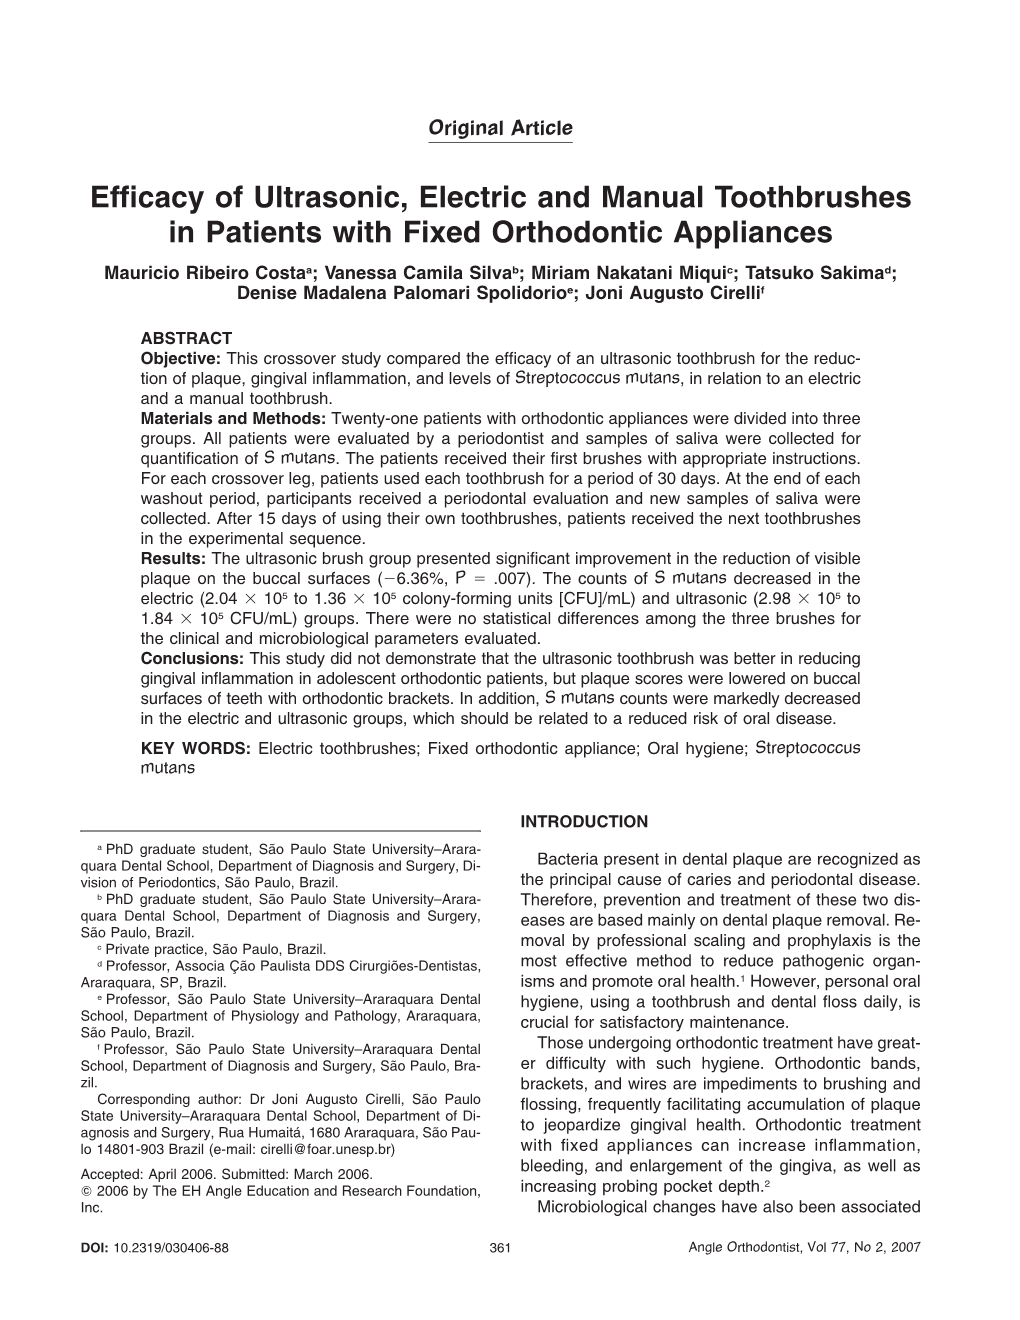 Efficacy of Ultrasonic, Electric and Manual Toothbrushes in Patients with Fixed Orthodontic Appliances